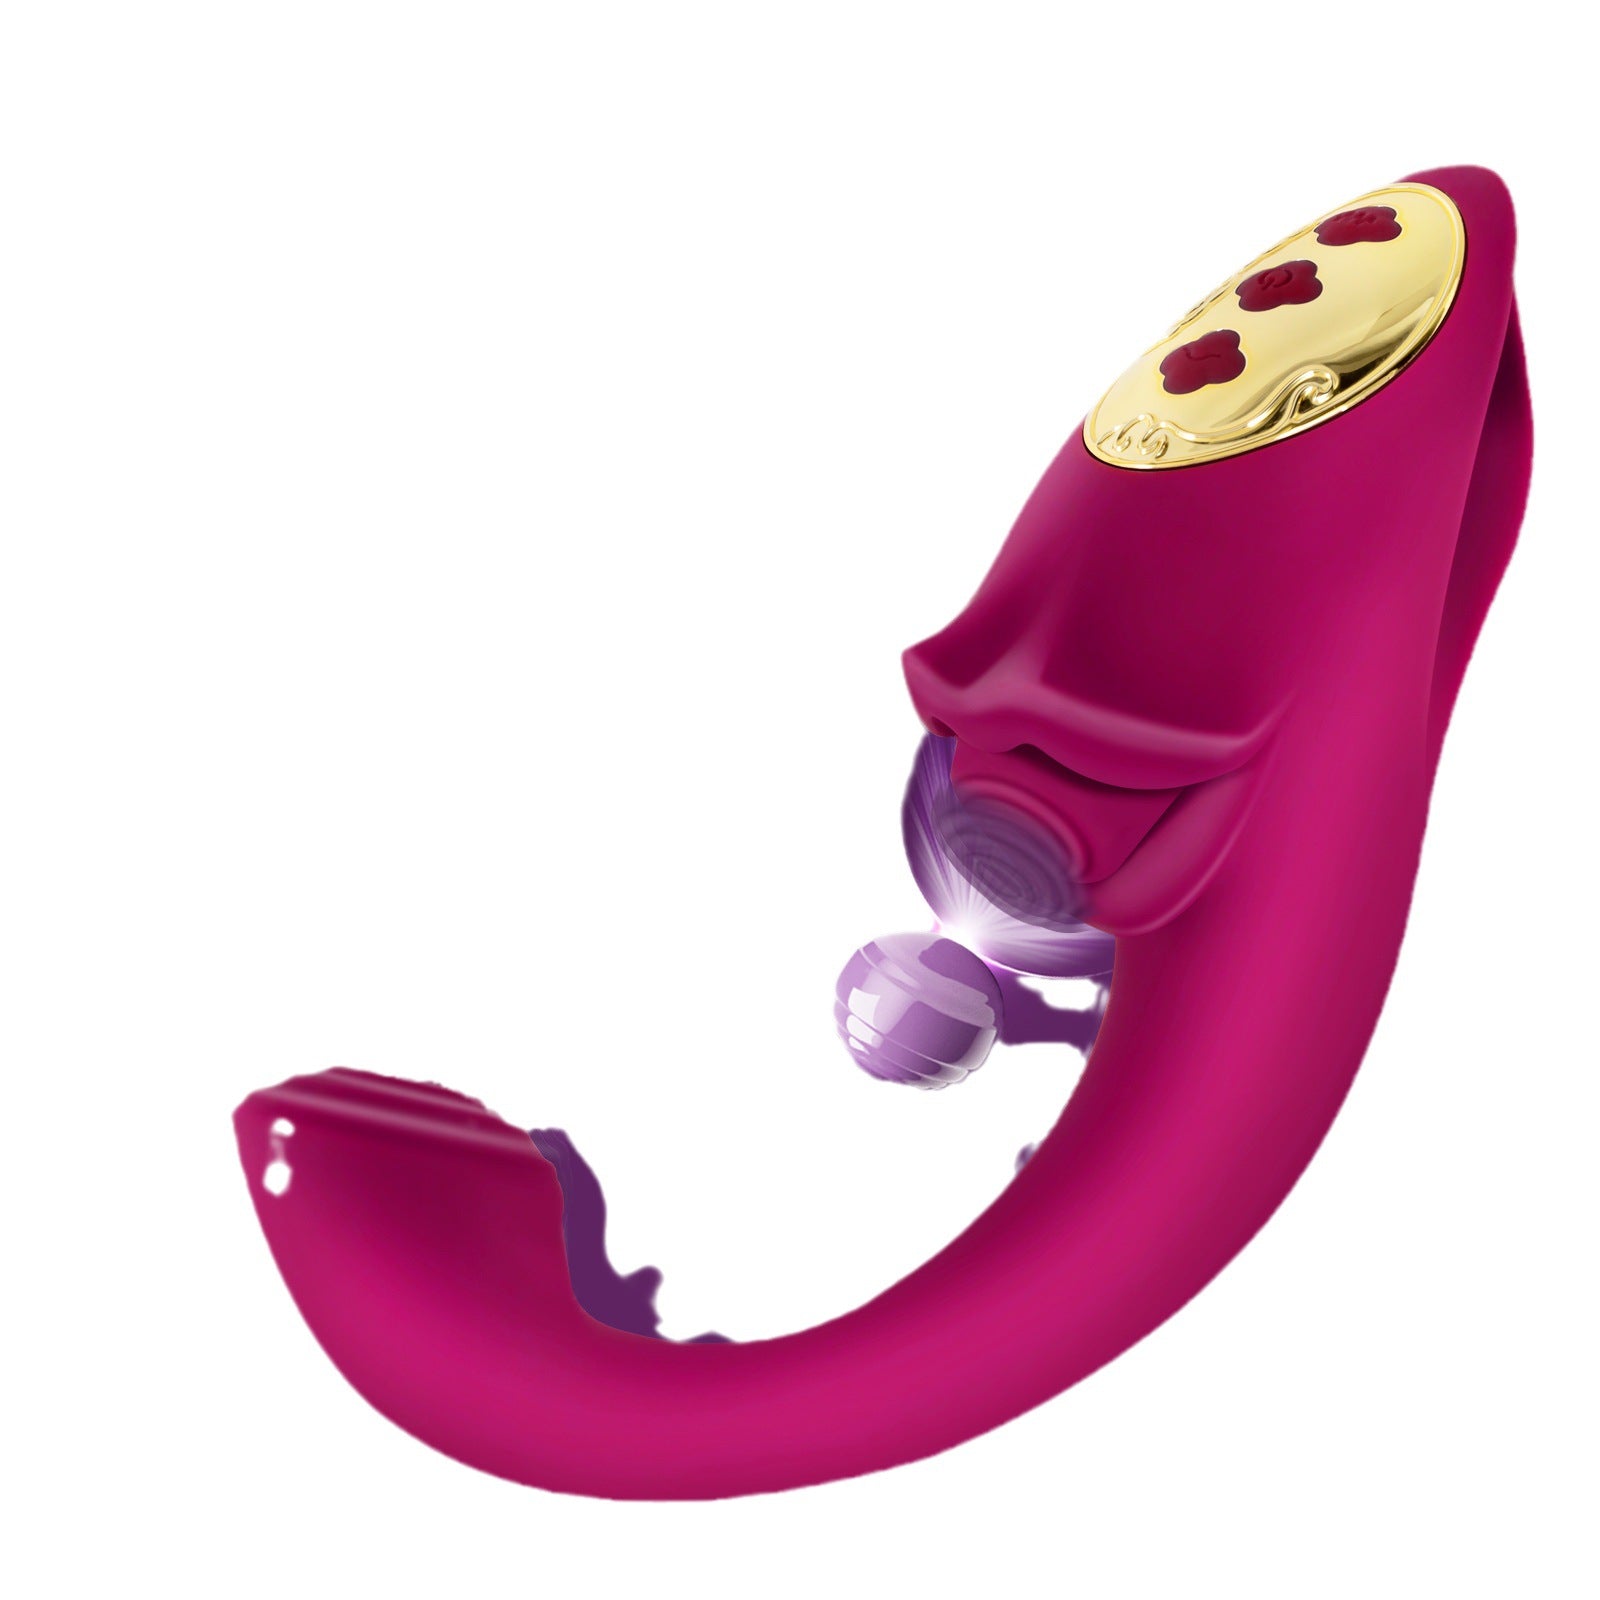 Lurevibe - 2 In 1 Rose Muncher Tapping Vibrator